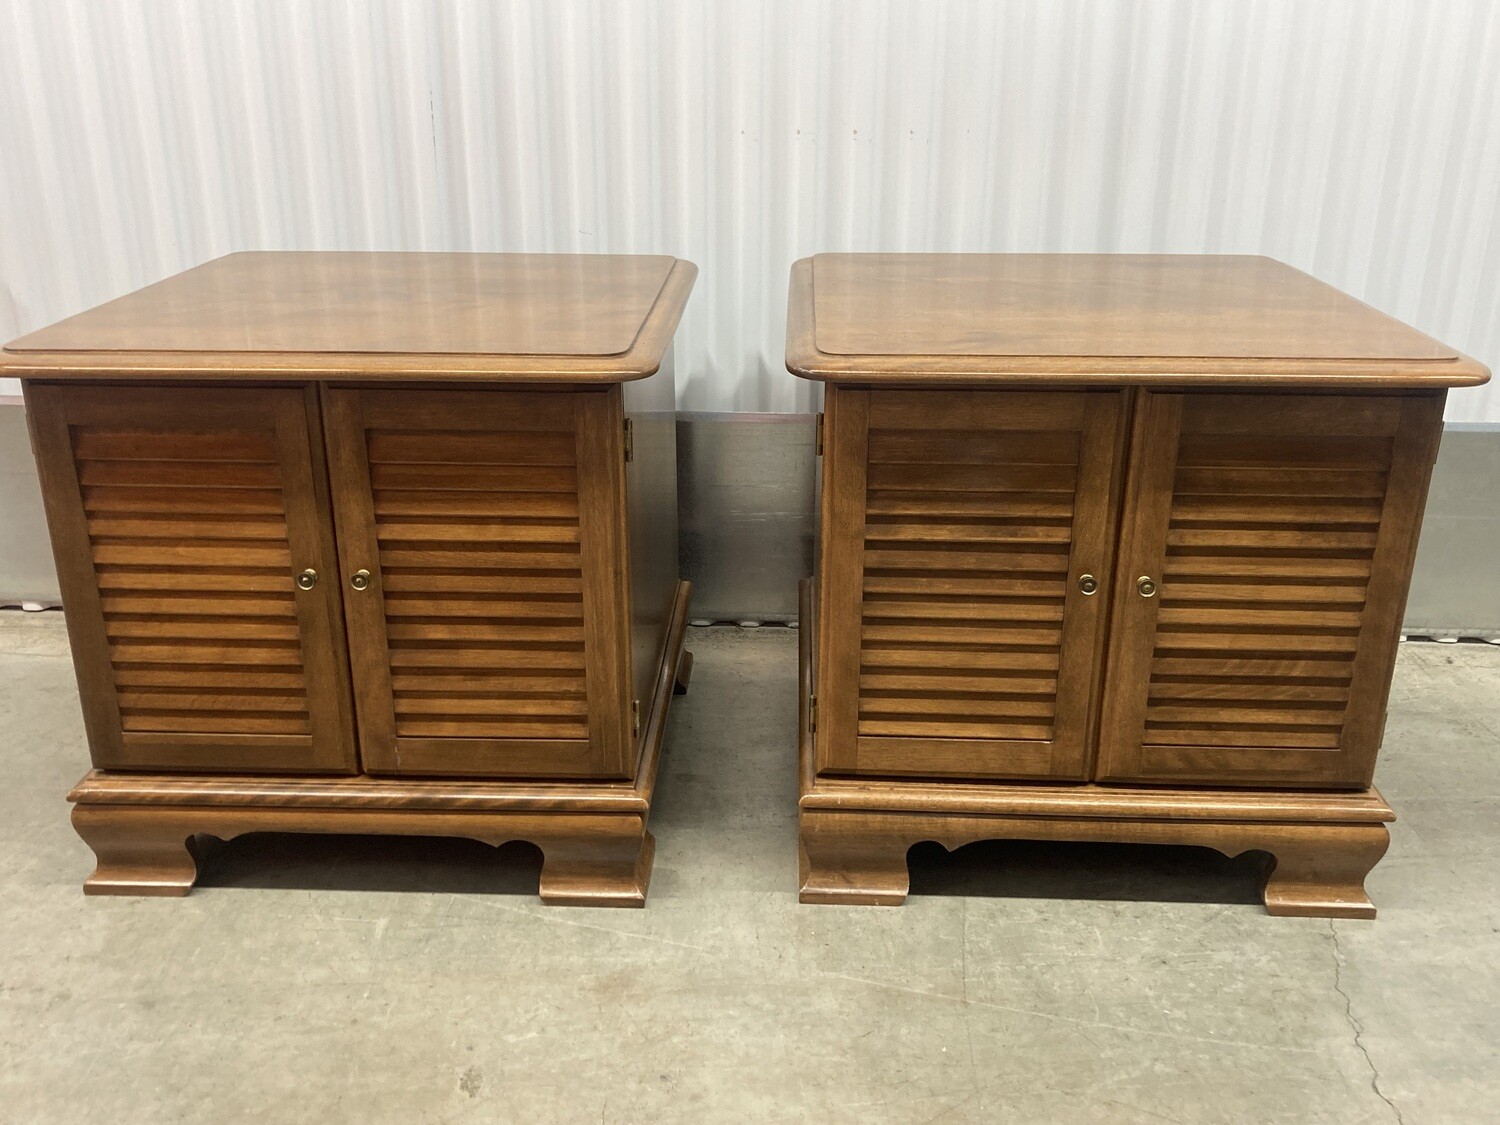 Ethan Allen matching Vintage Record Cabinets #2213